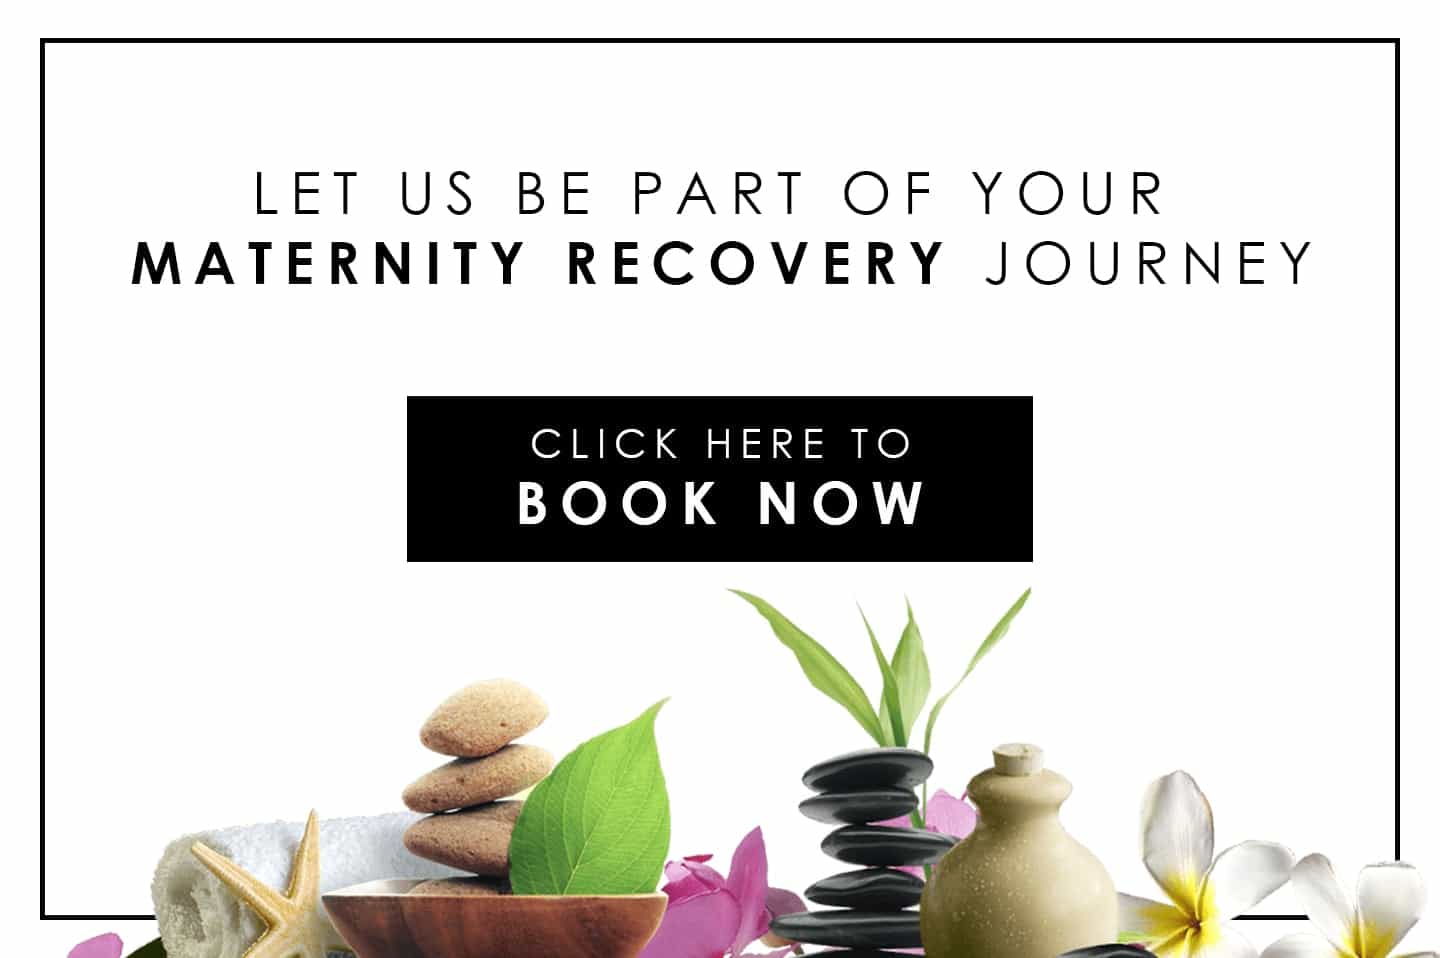 Maternity Recovery Journey